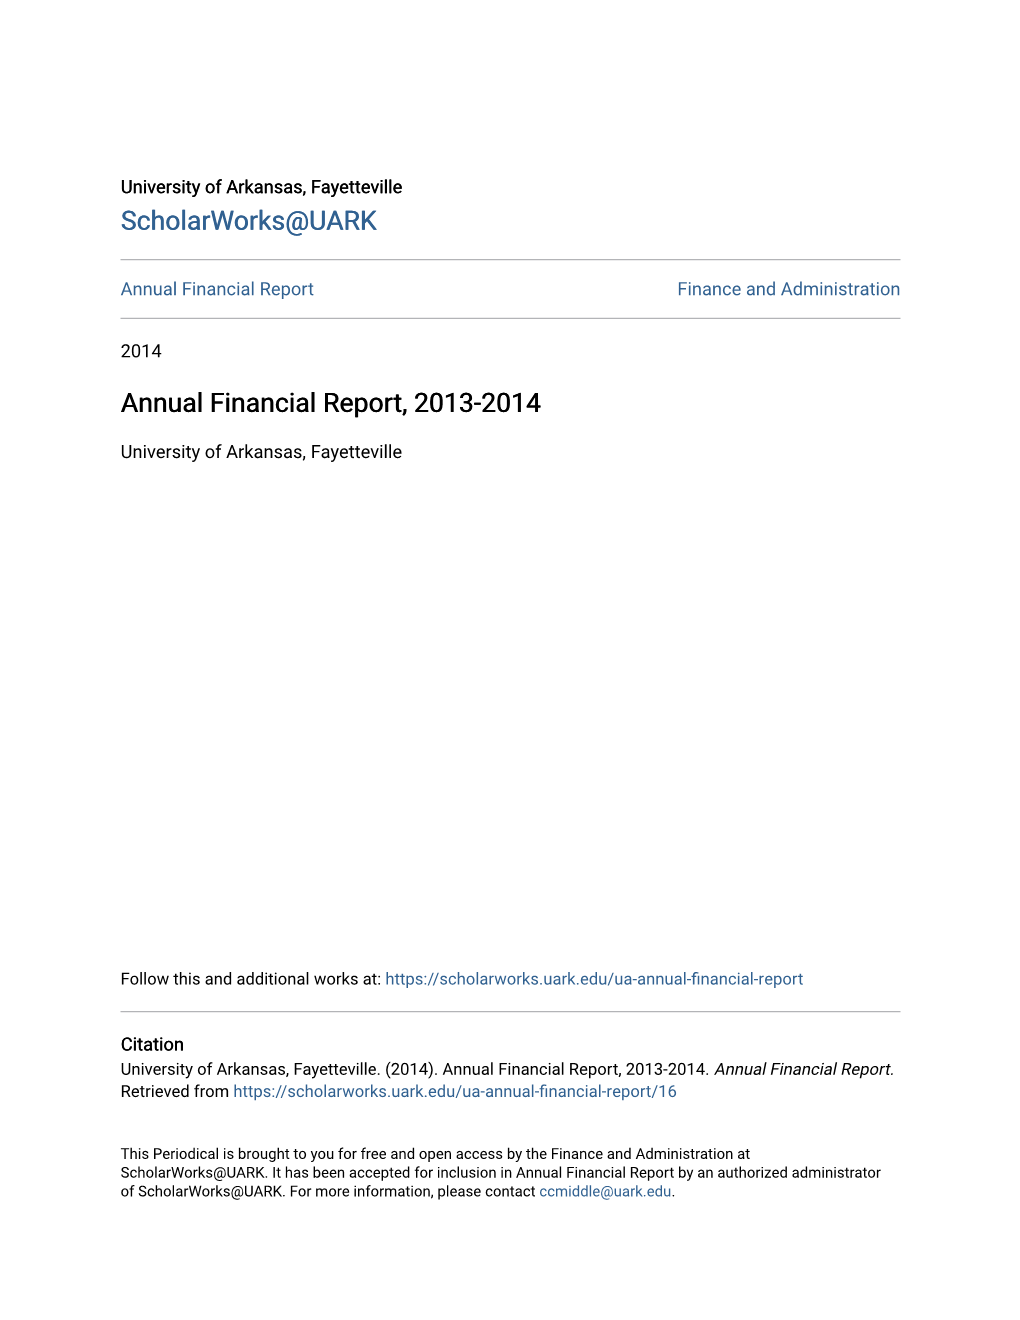 Annual Financial Report, 2013-2014